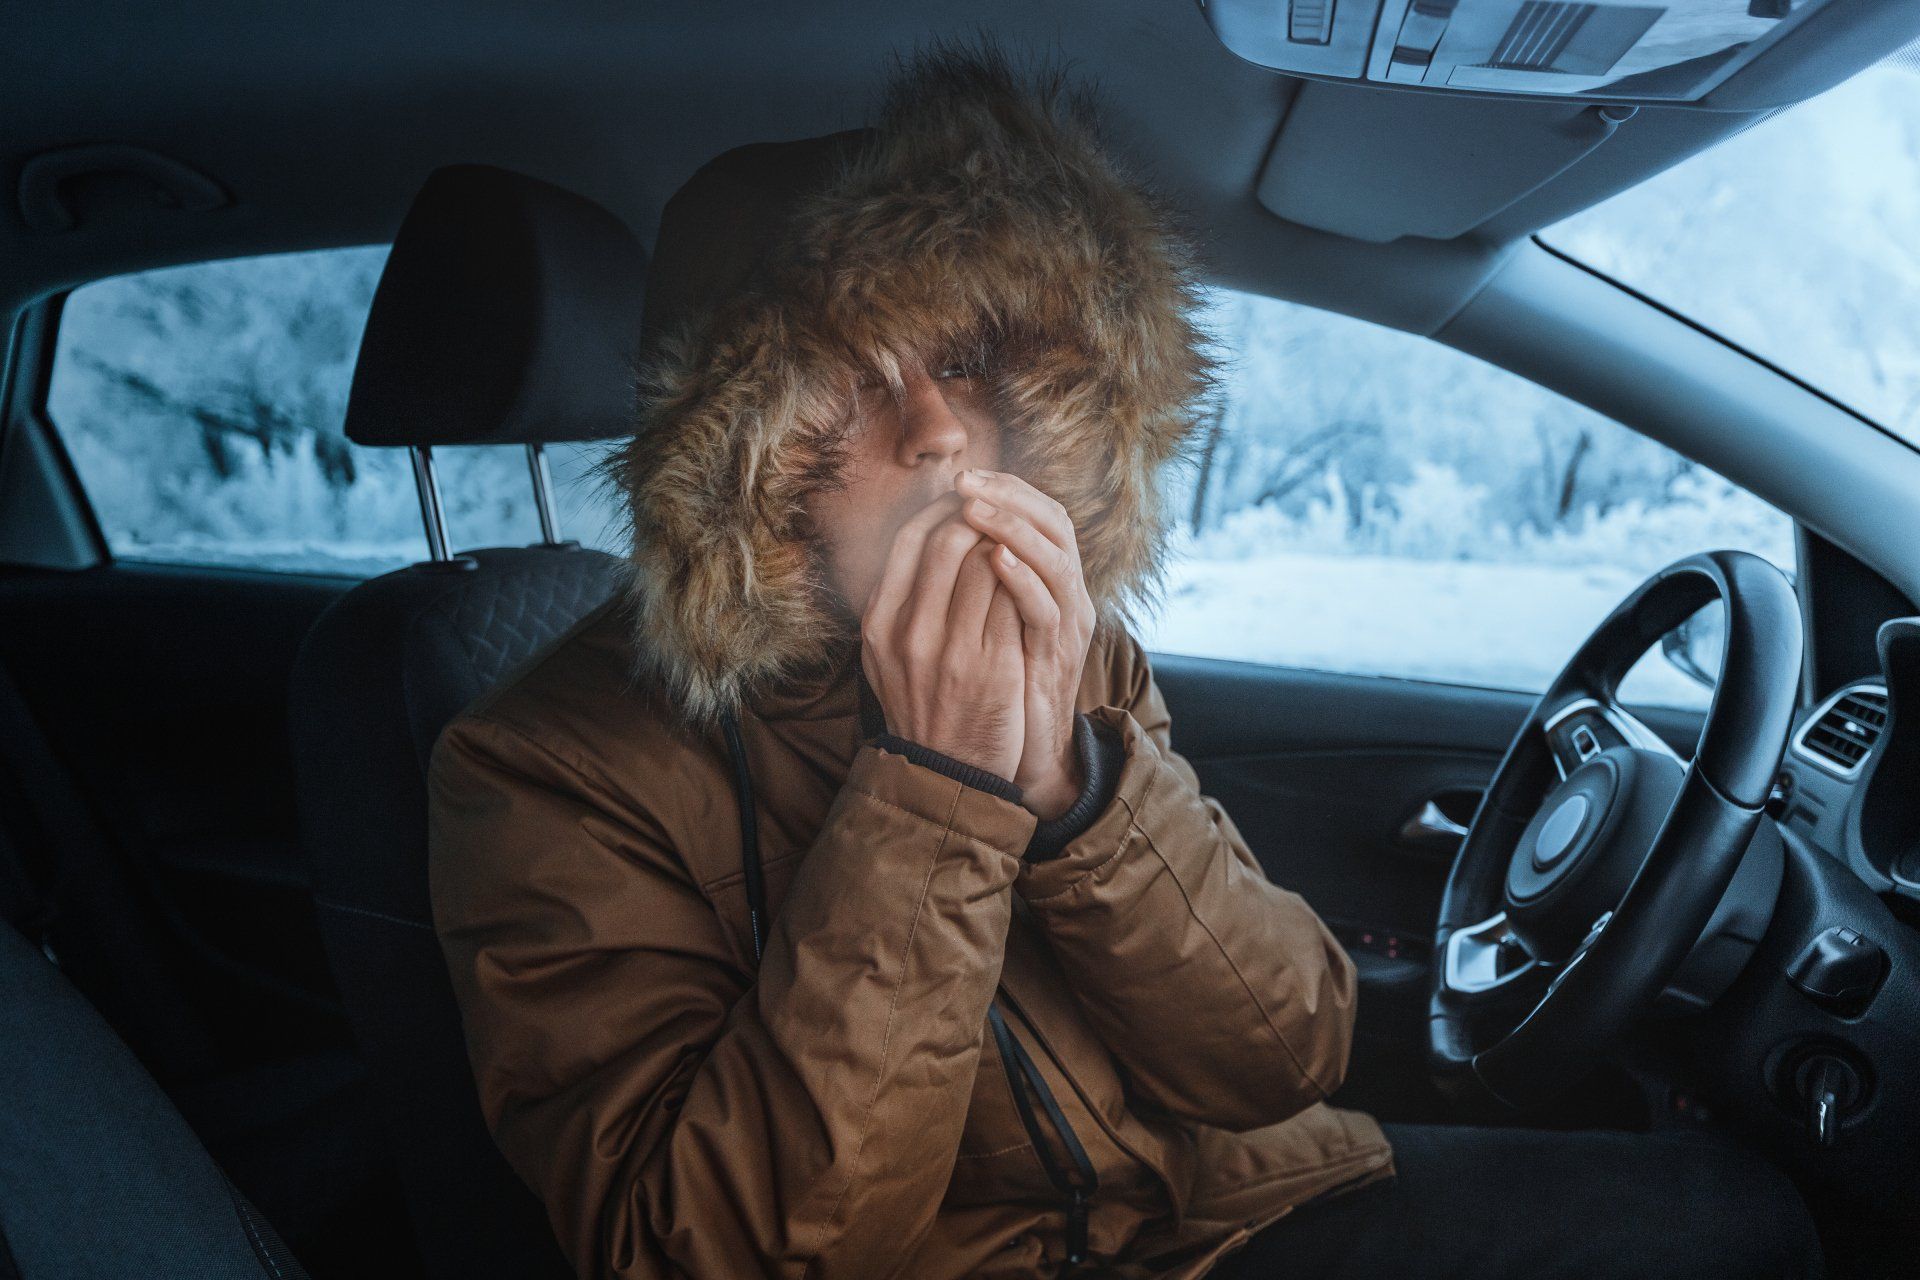 Man trying to keep warm in a cold car